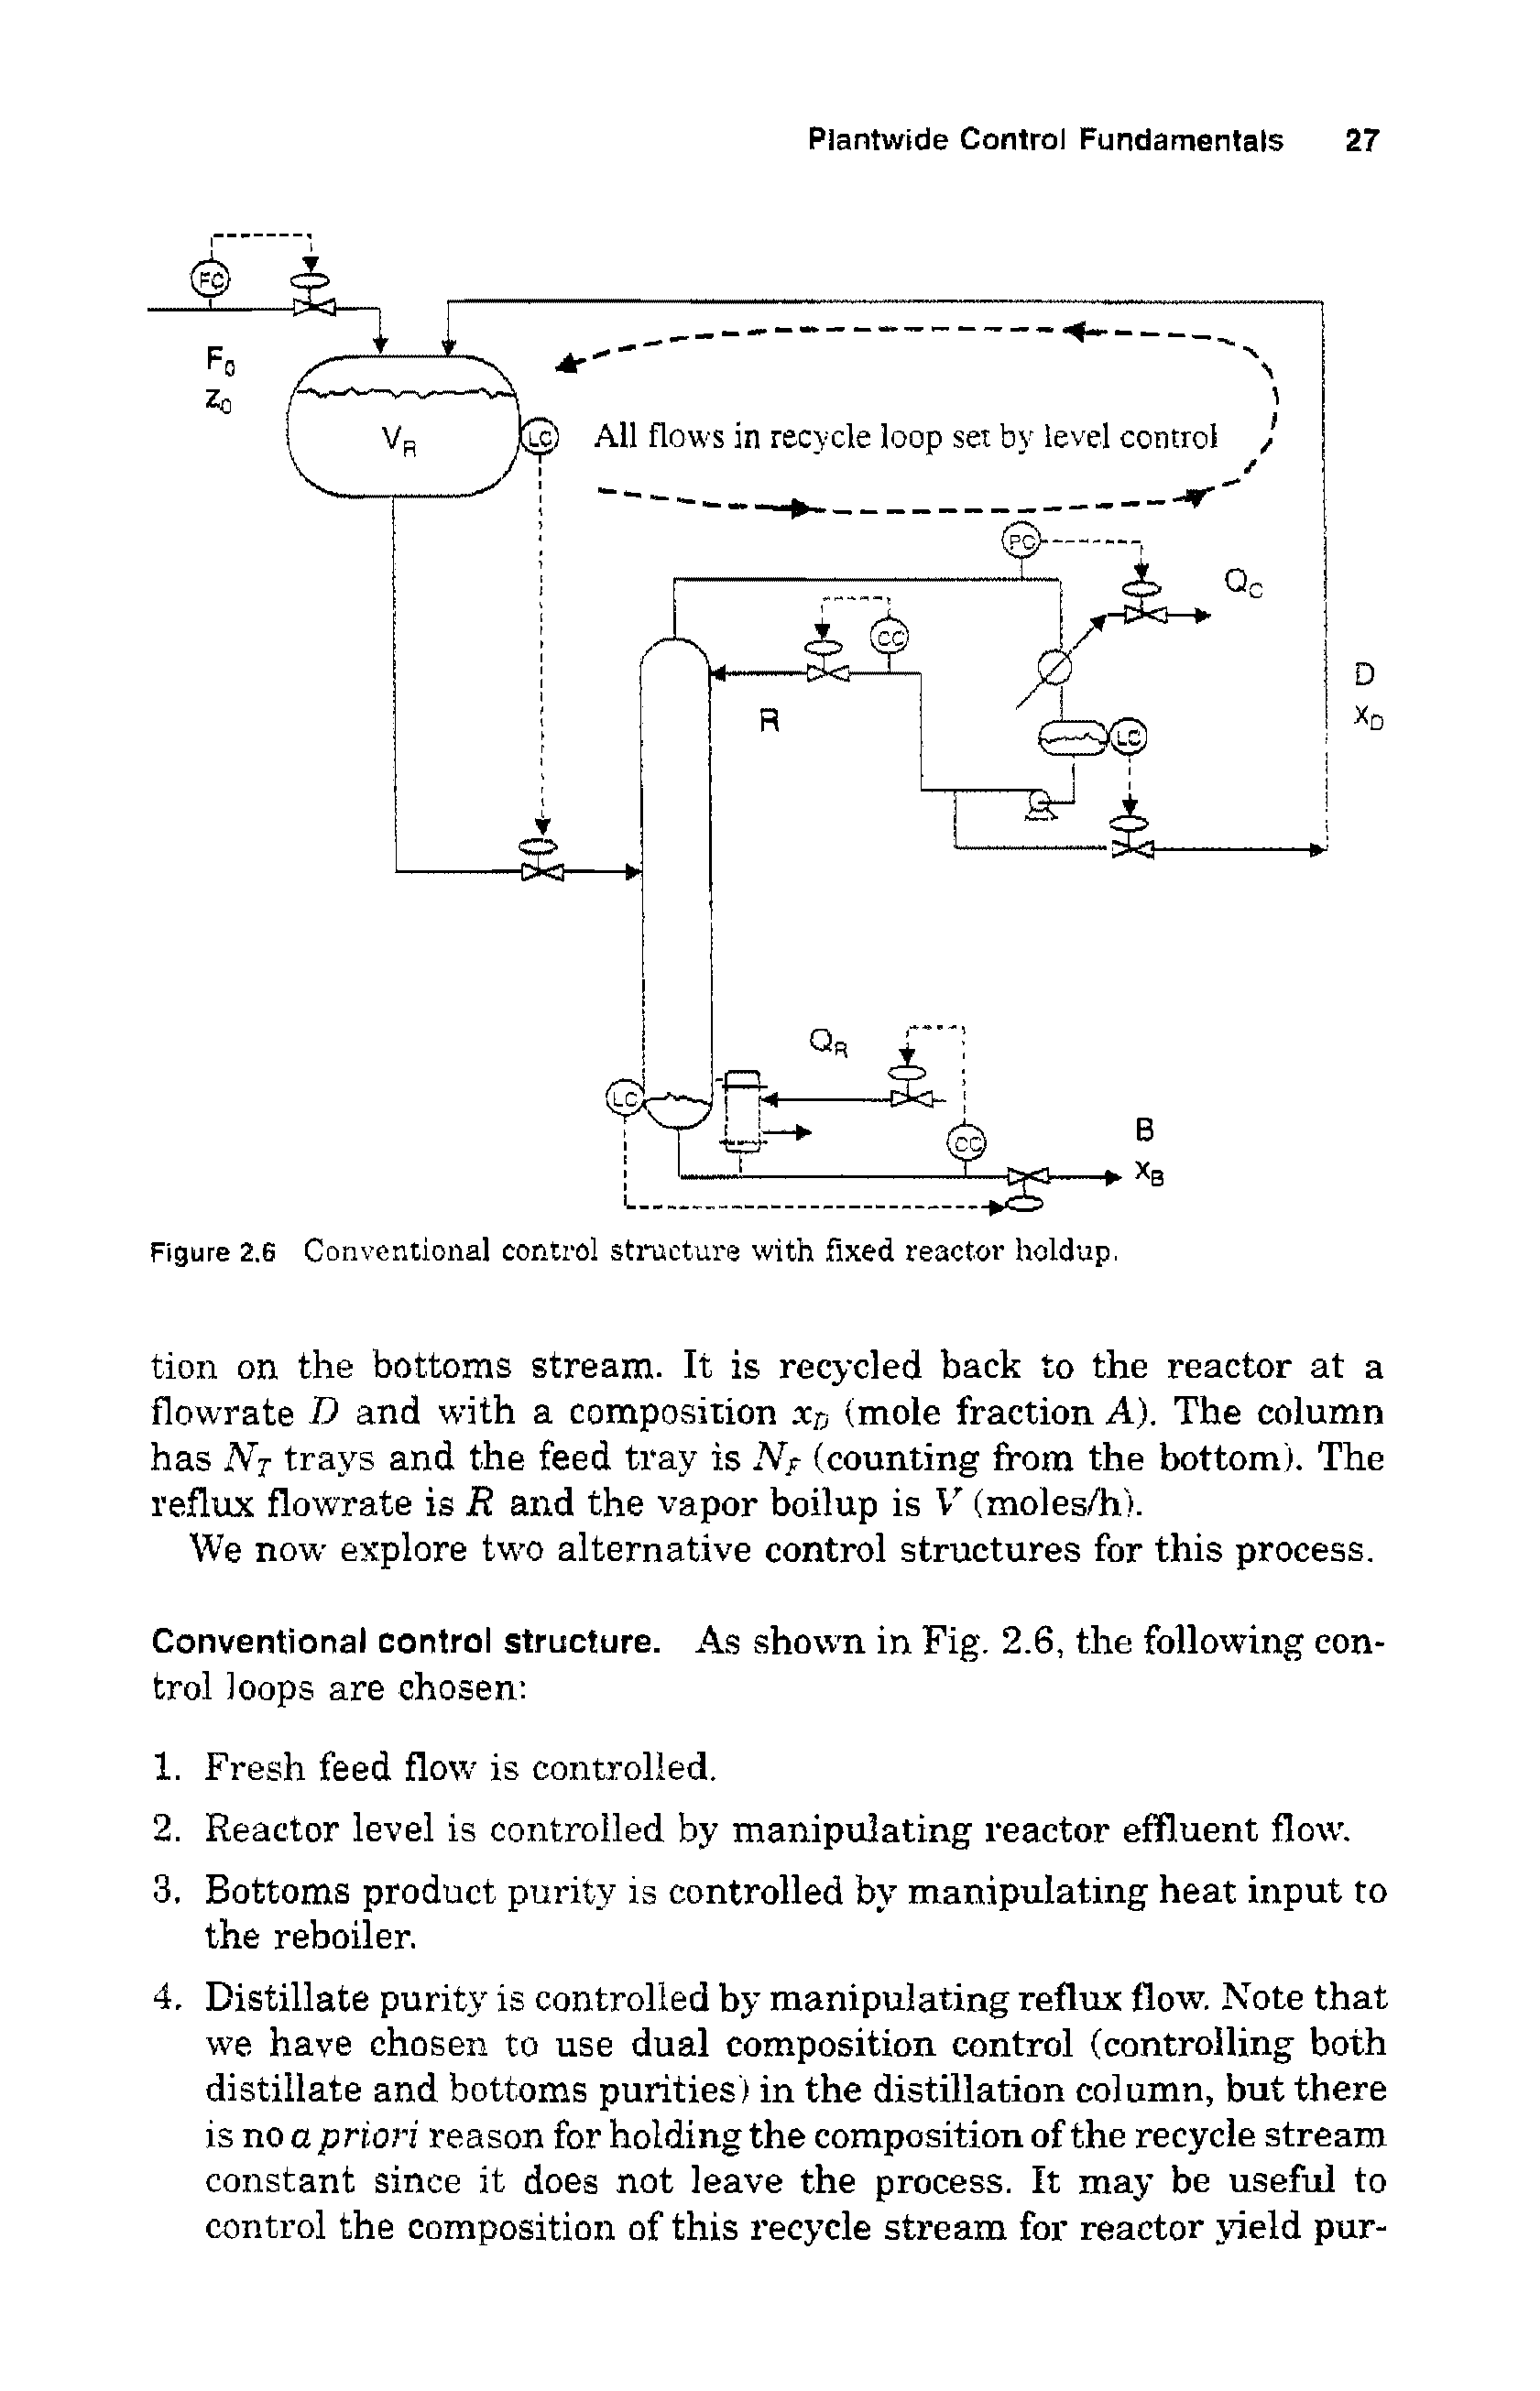 Figure 2.6 Conventional control structure with fixed reactor holdup,...